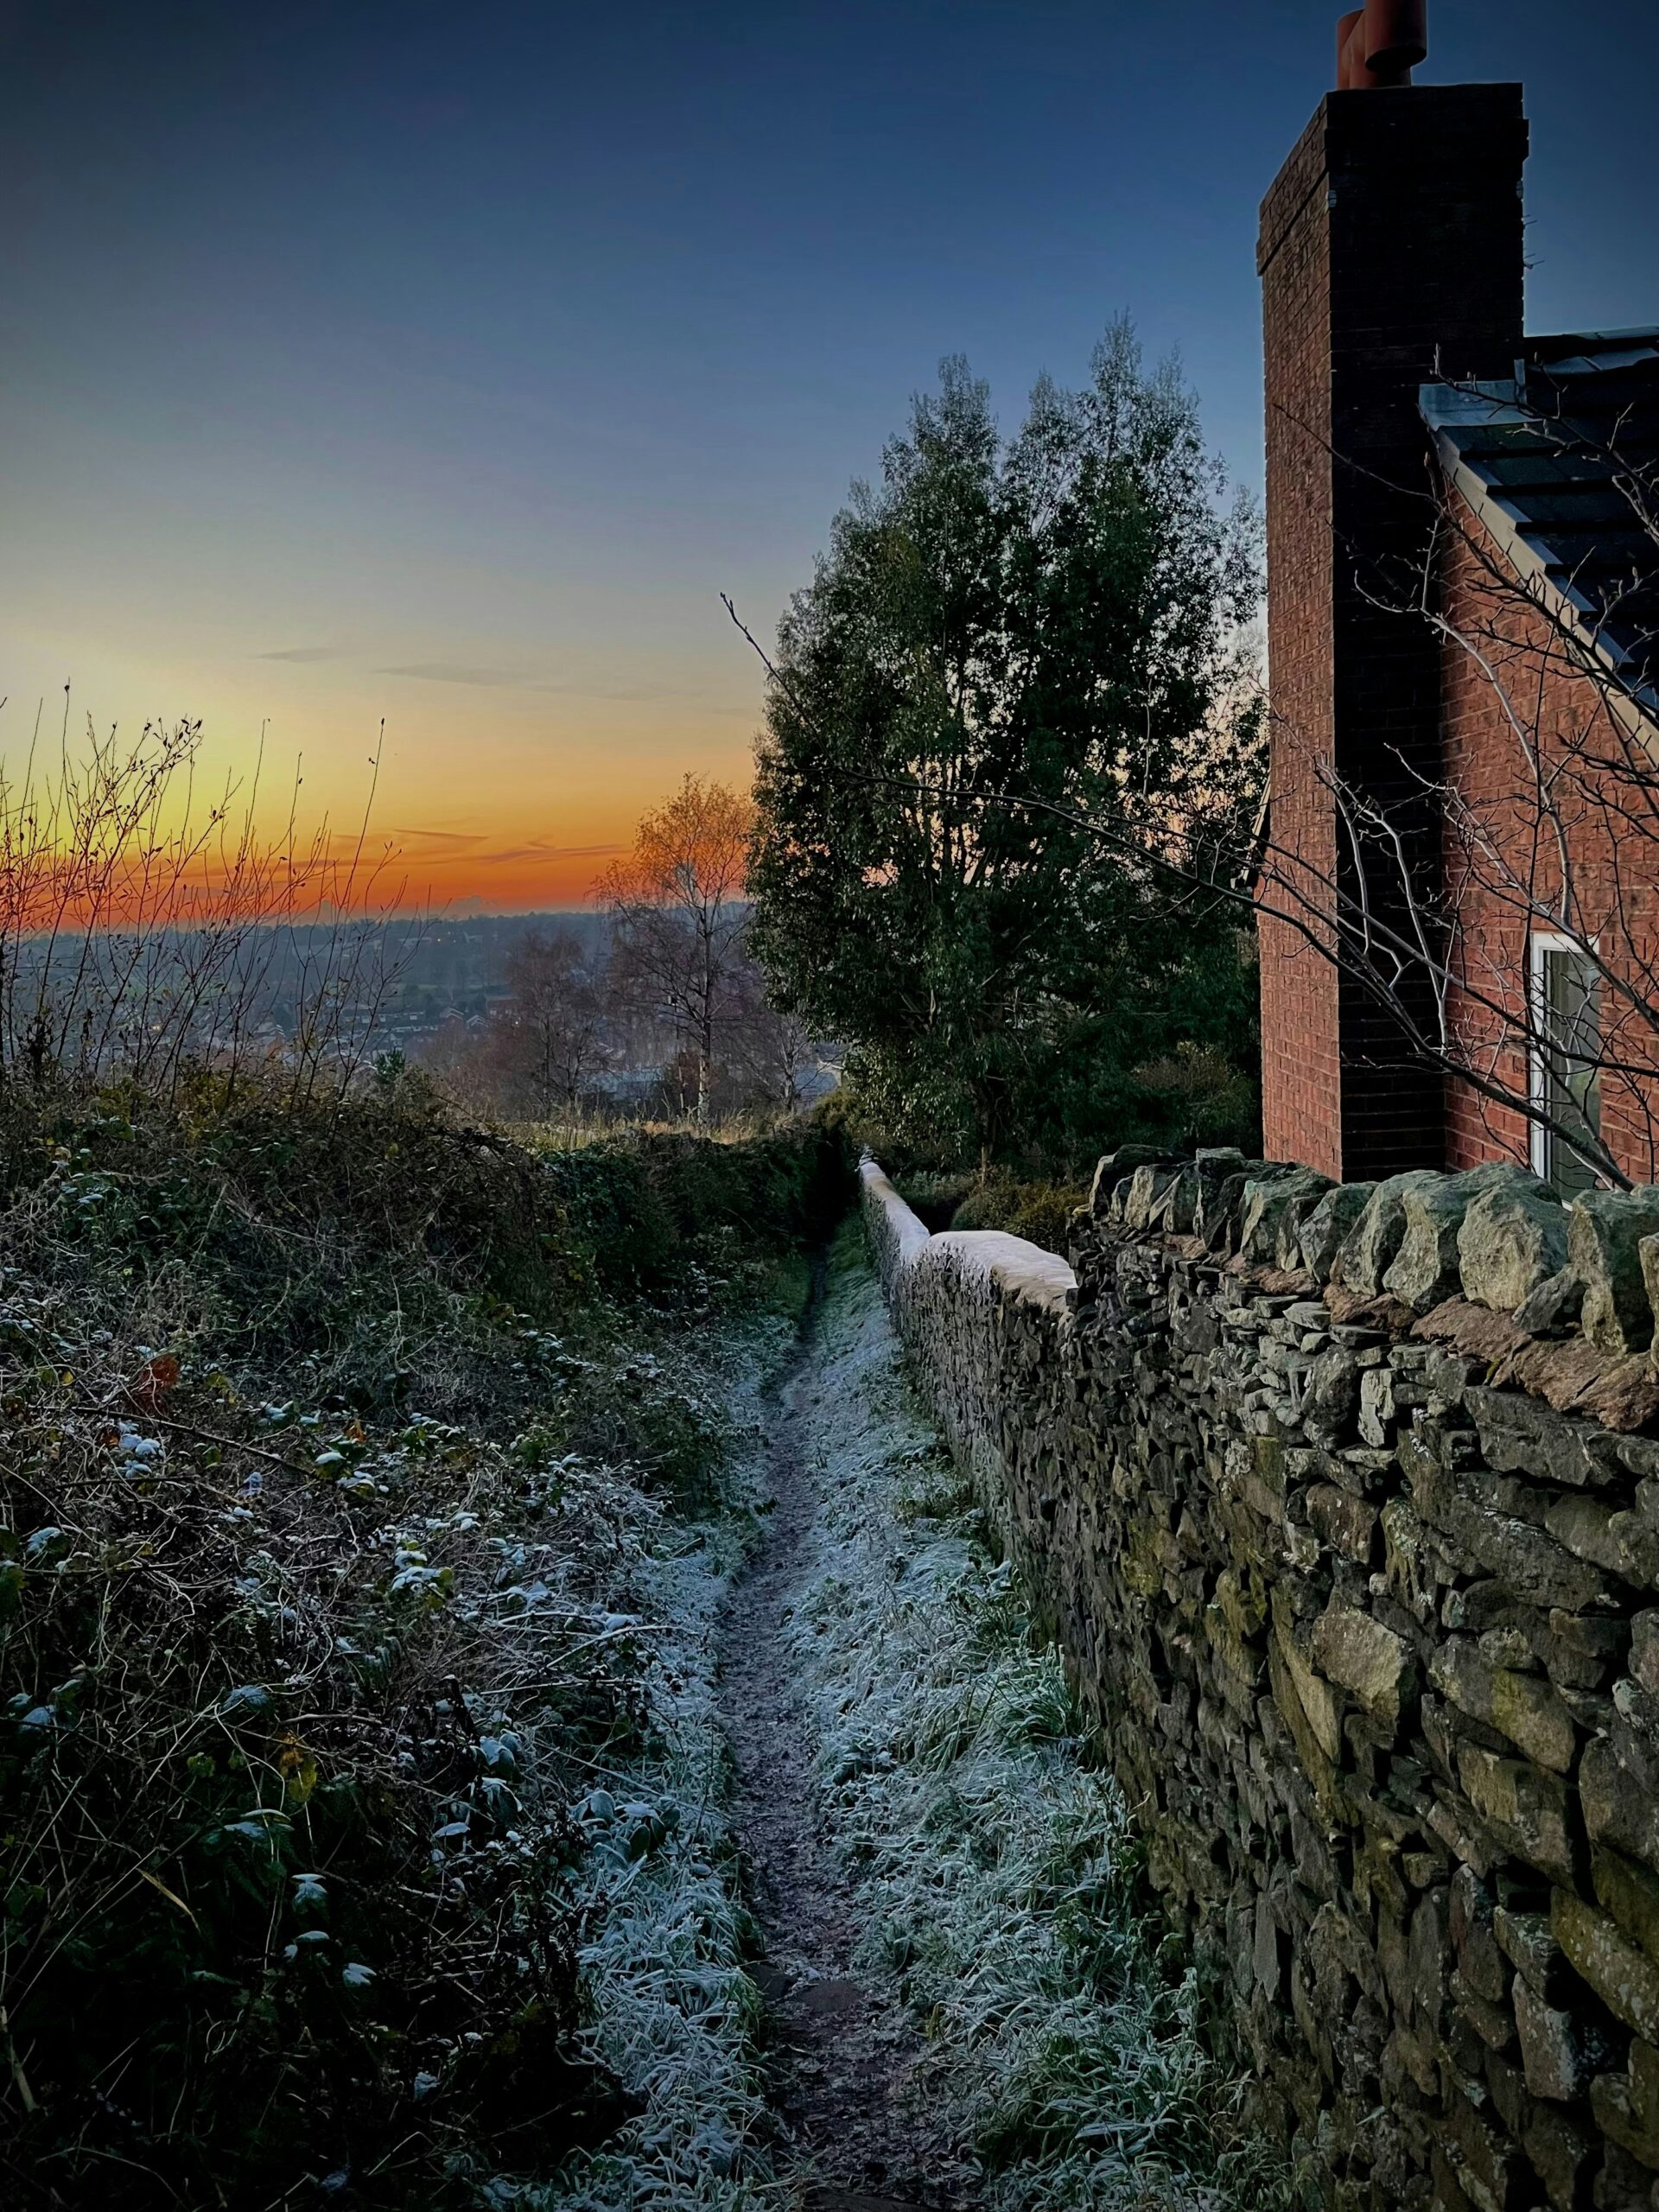 Macclesfield Forest makes for one of the best winter walks near Manchester